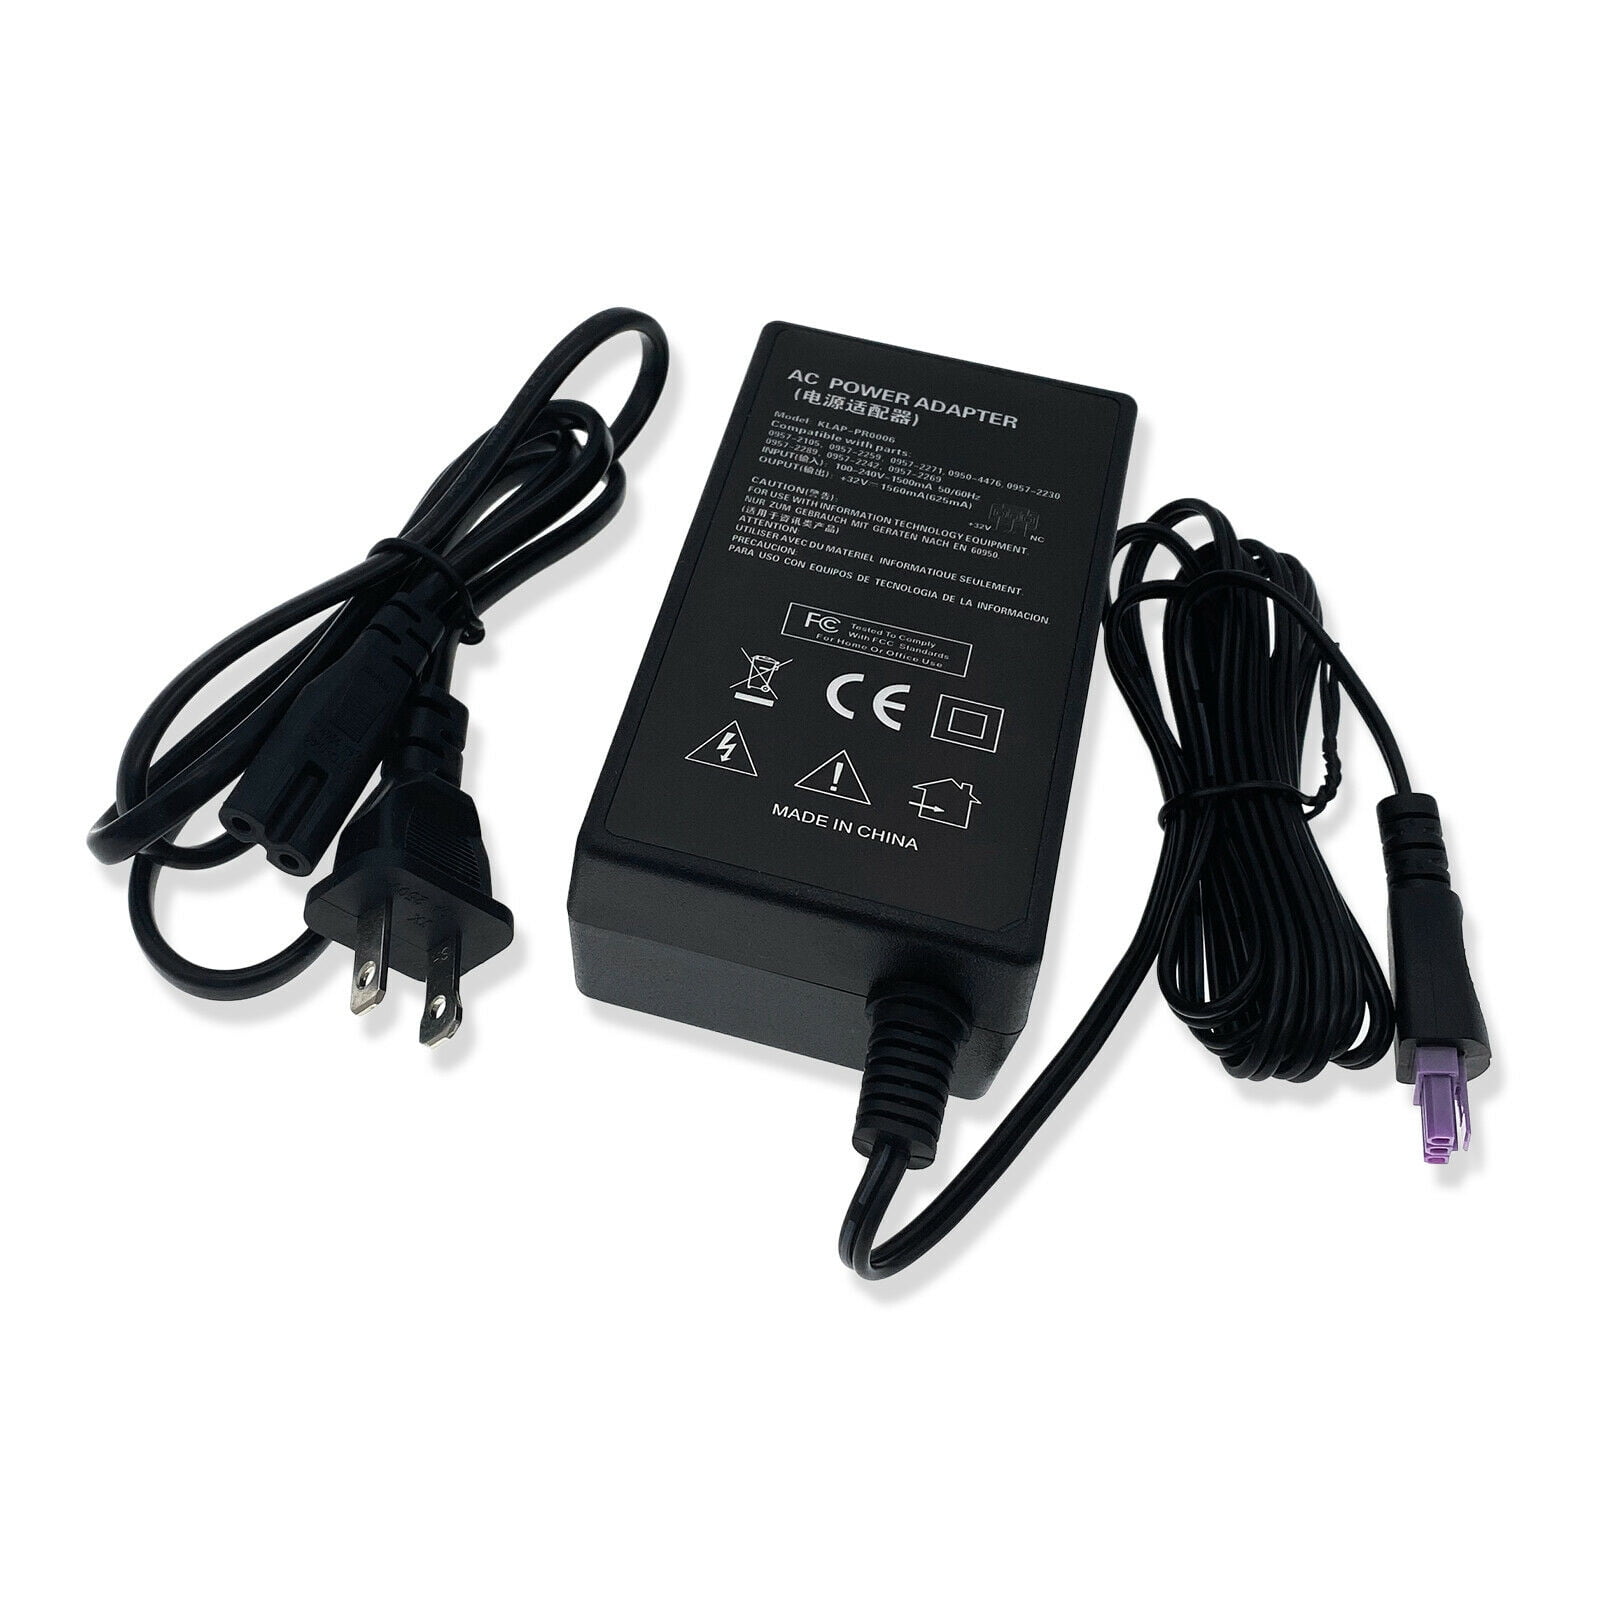 AC For HP OfficeJet 6500 All-In-One Printer Power Supply - Walmart.com